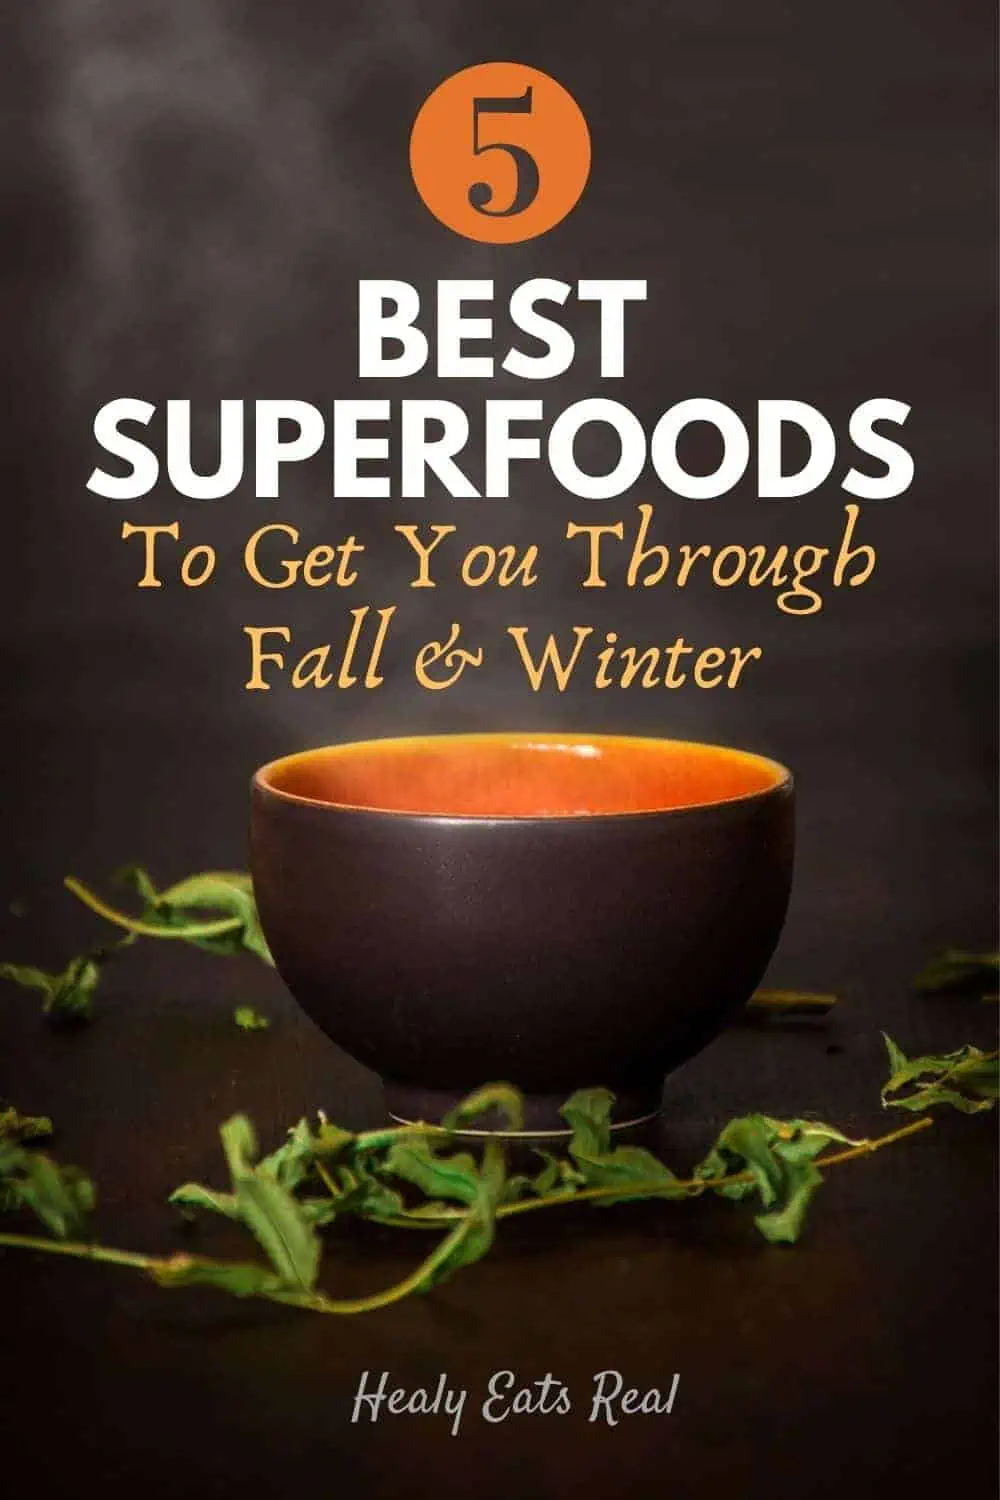 5 Best Superfoods to Get You Through Fall & Winter